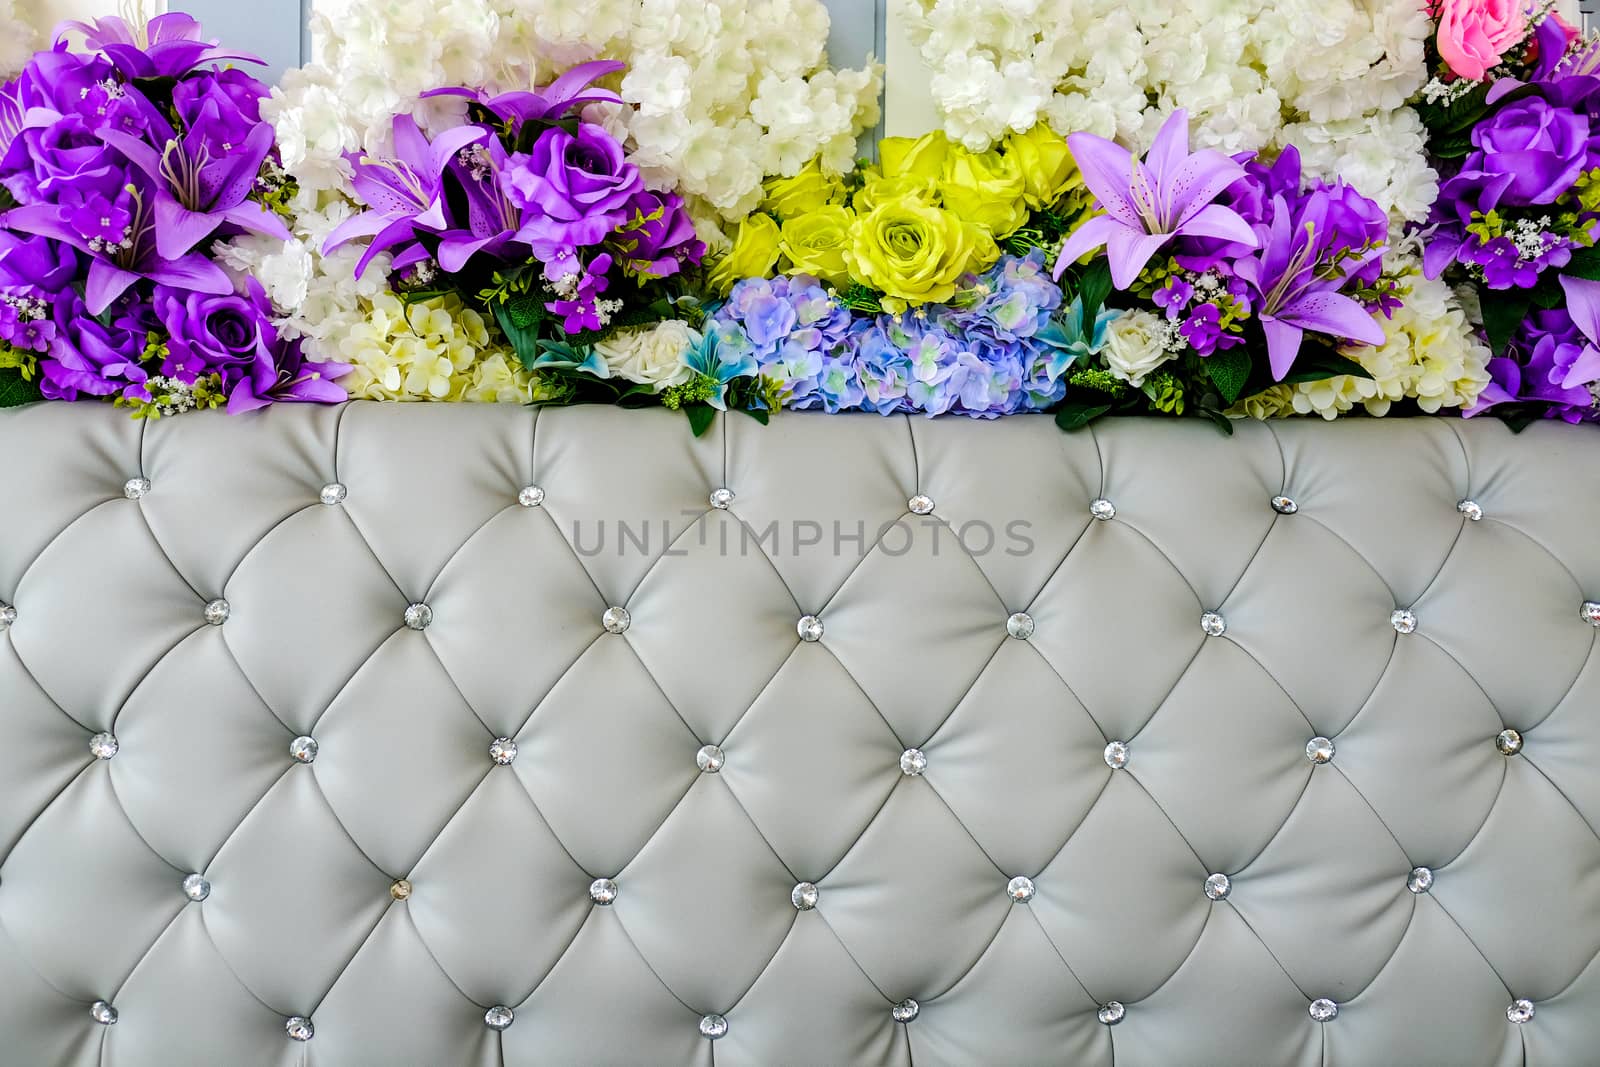 gray leather upholstery and artificial flowers background